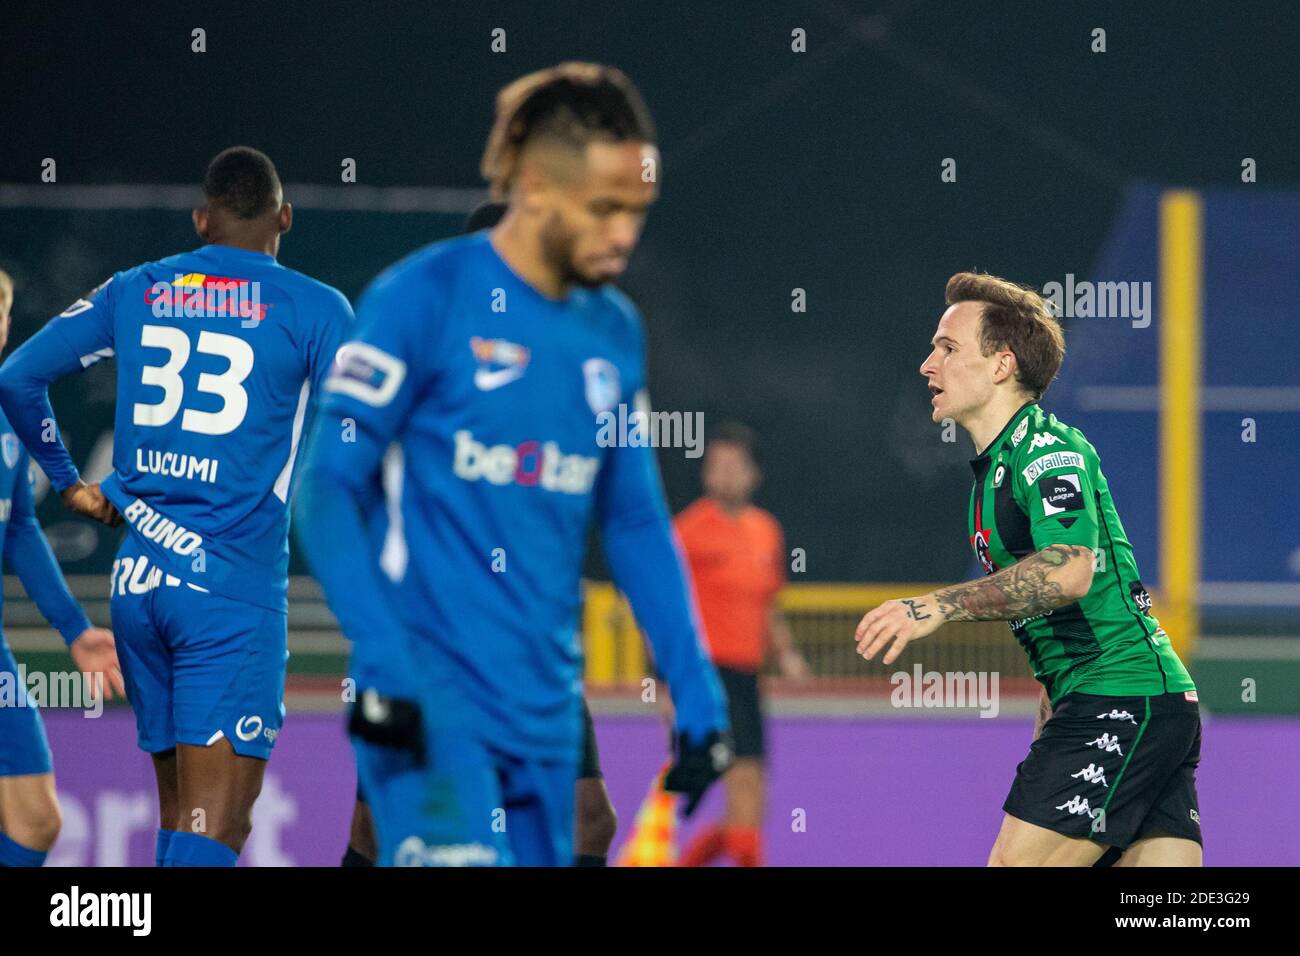 Cercle's Dino Hotic celebrates after scoring during a postponed soccer match between Cercle Brugge KSV and KRC Genk, Saturday 28 November 2020 in Brug Stock Photo